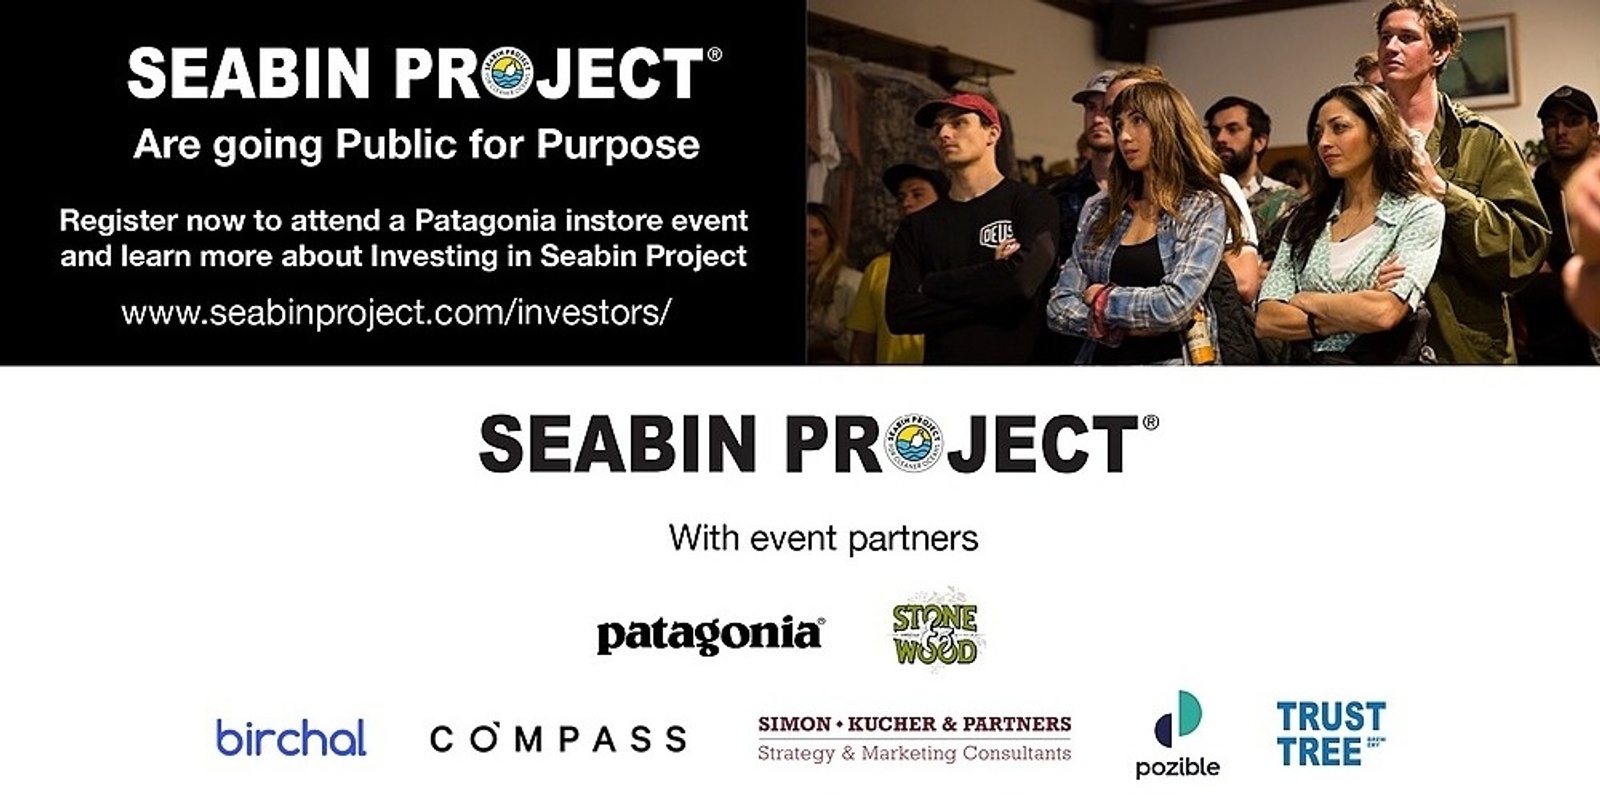 Banner image for Seabin Project - Manly (NSW) - Going Public For Purpose